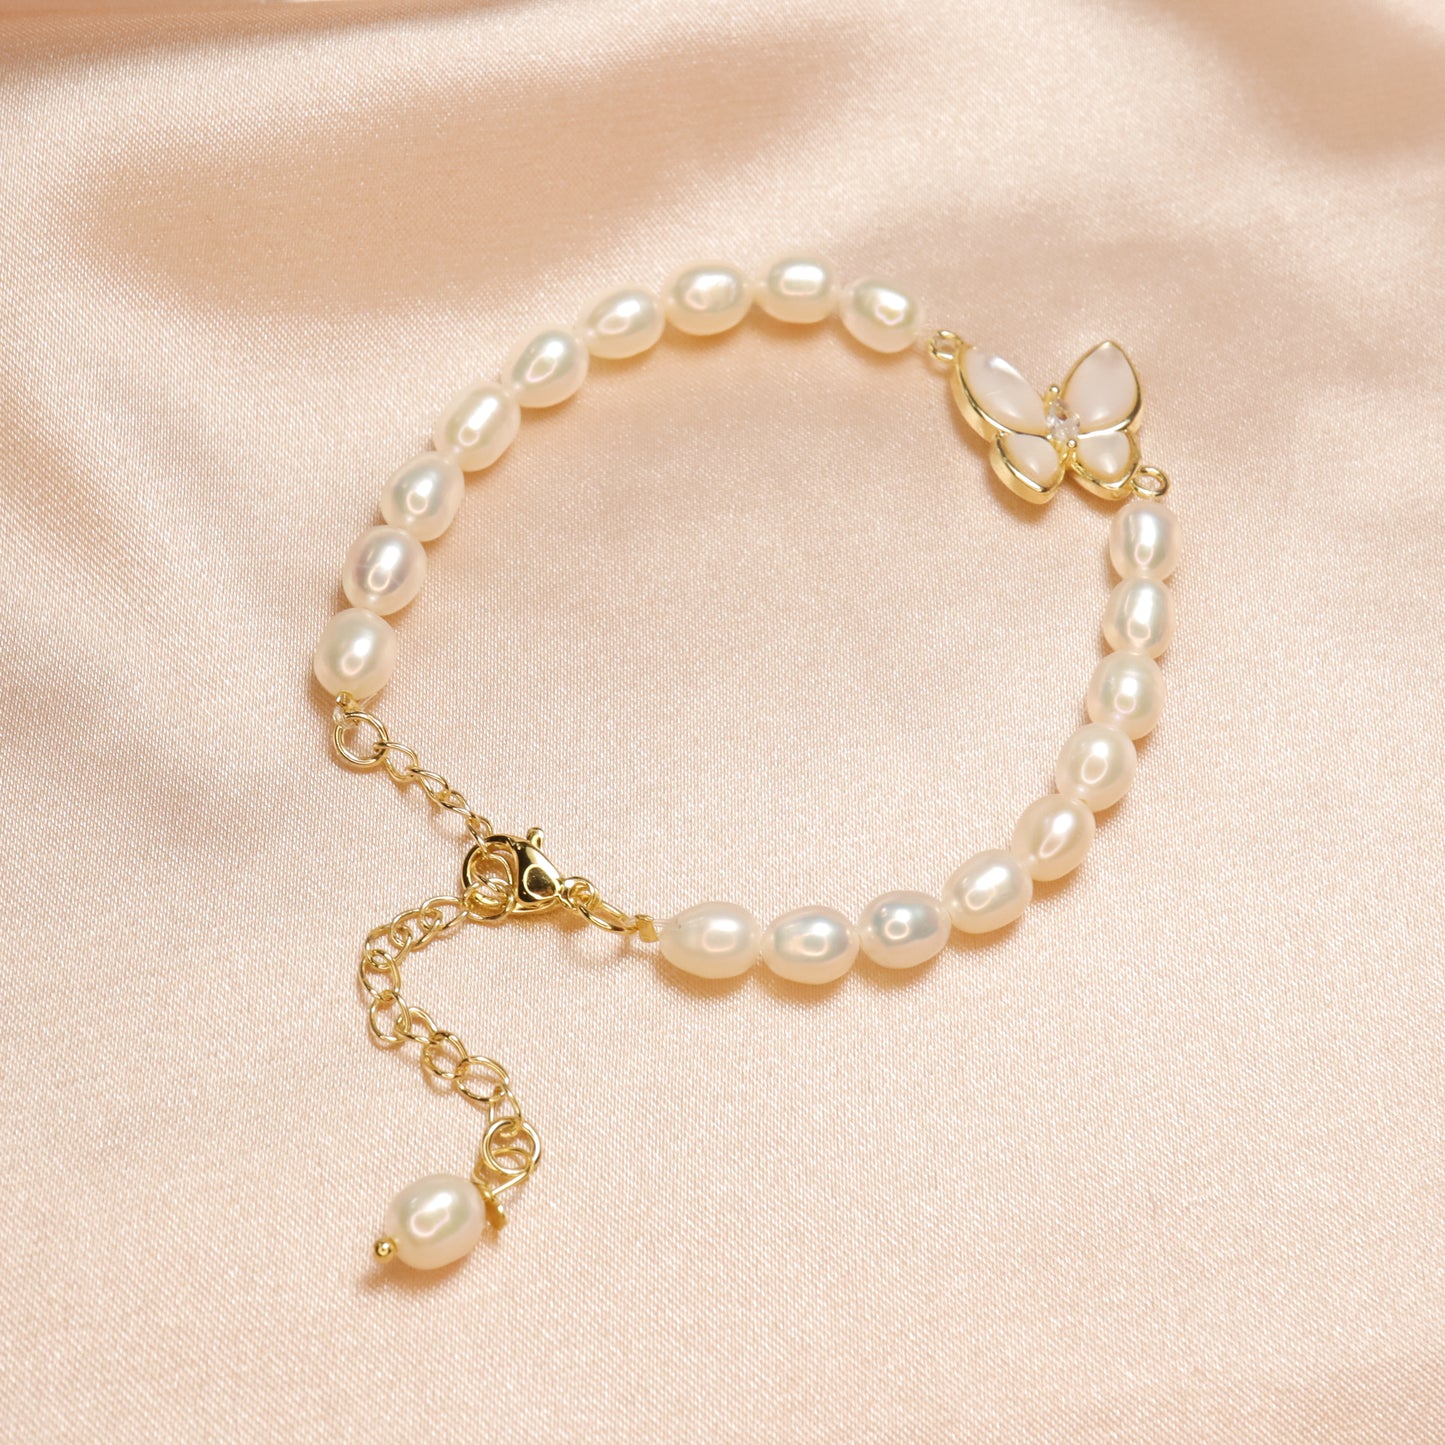 Pearl Shell Butterfly -  Freshwater Pearl Bracelet with Adjustable Chain